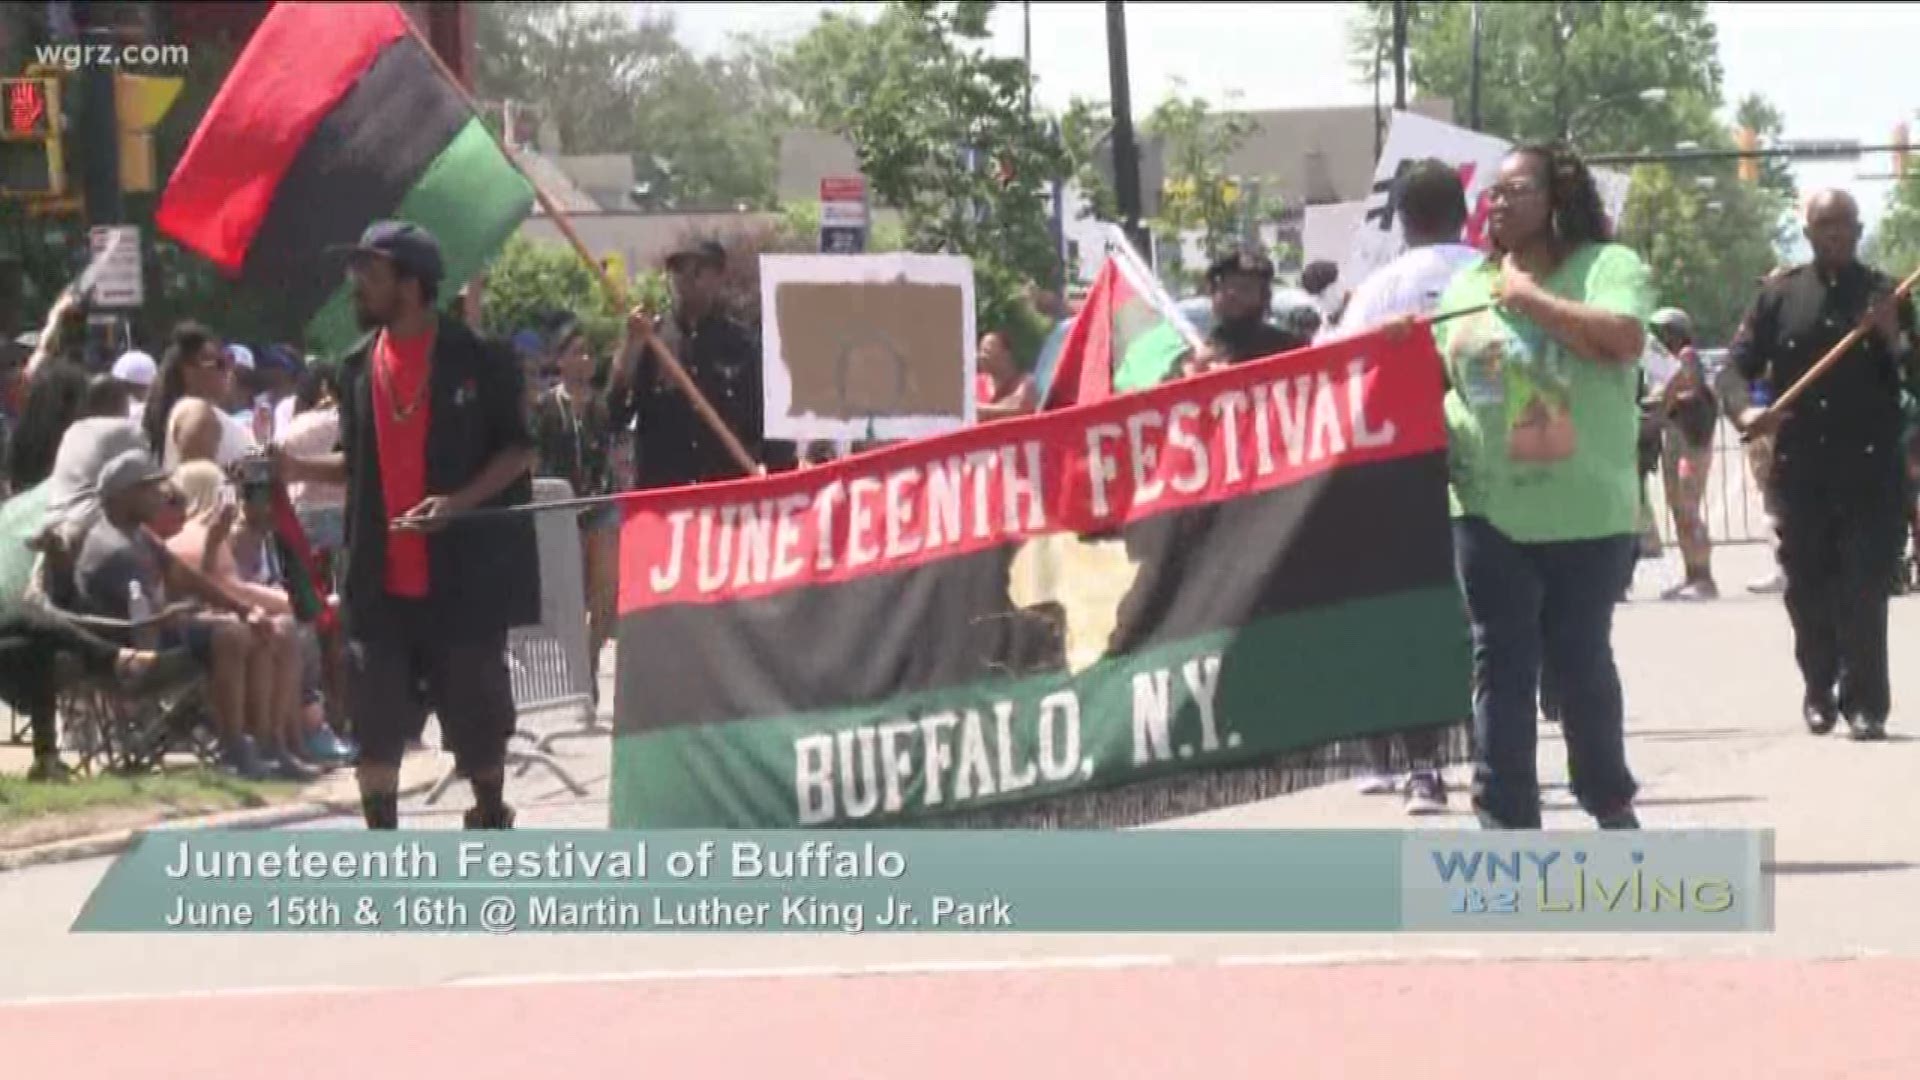 WNY Living - May 25 - Juneteenth Festival of Buffalo (SPONSORED CONTENT)